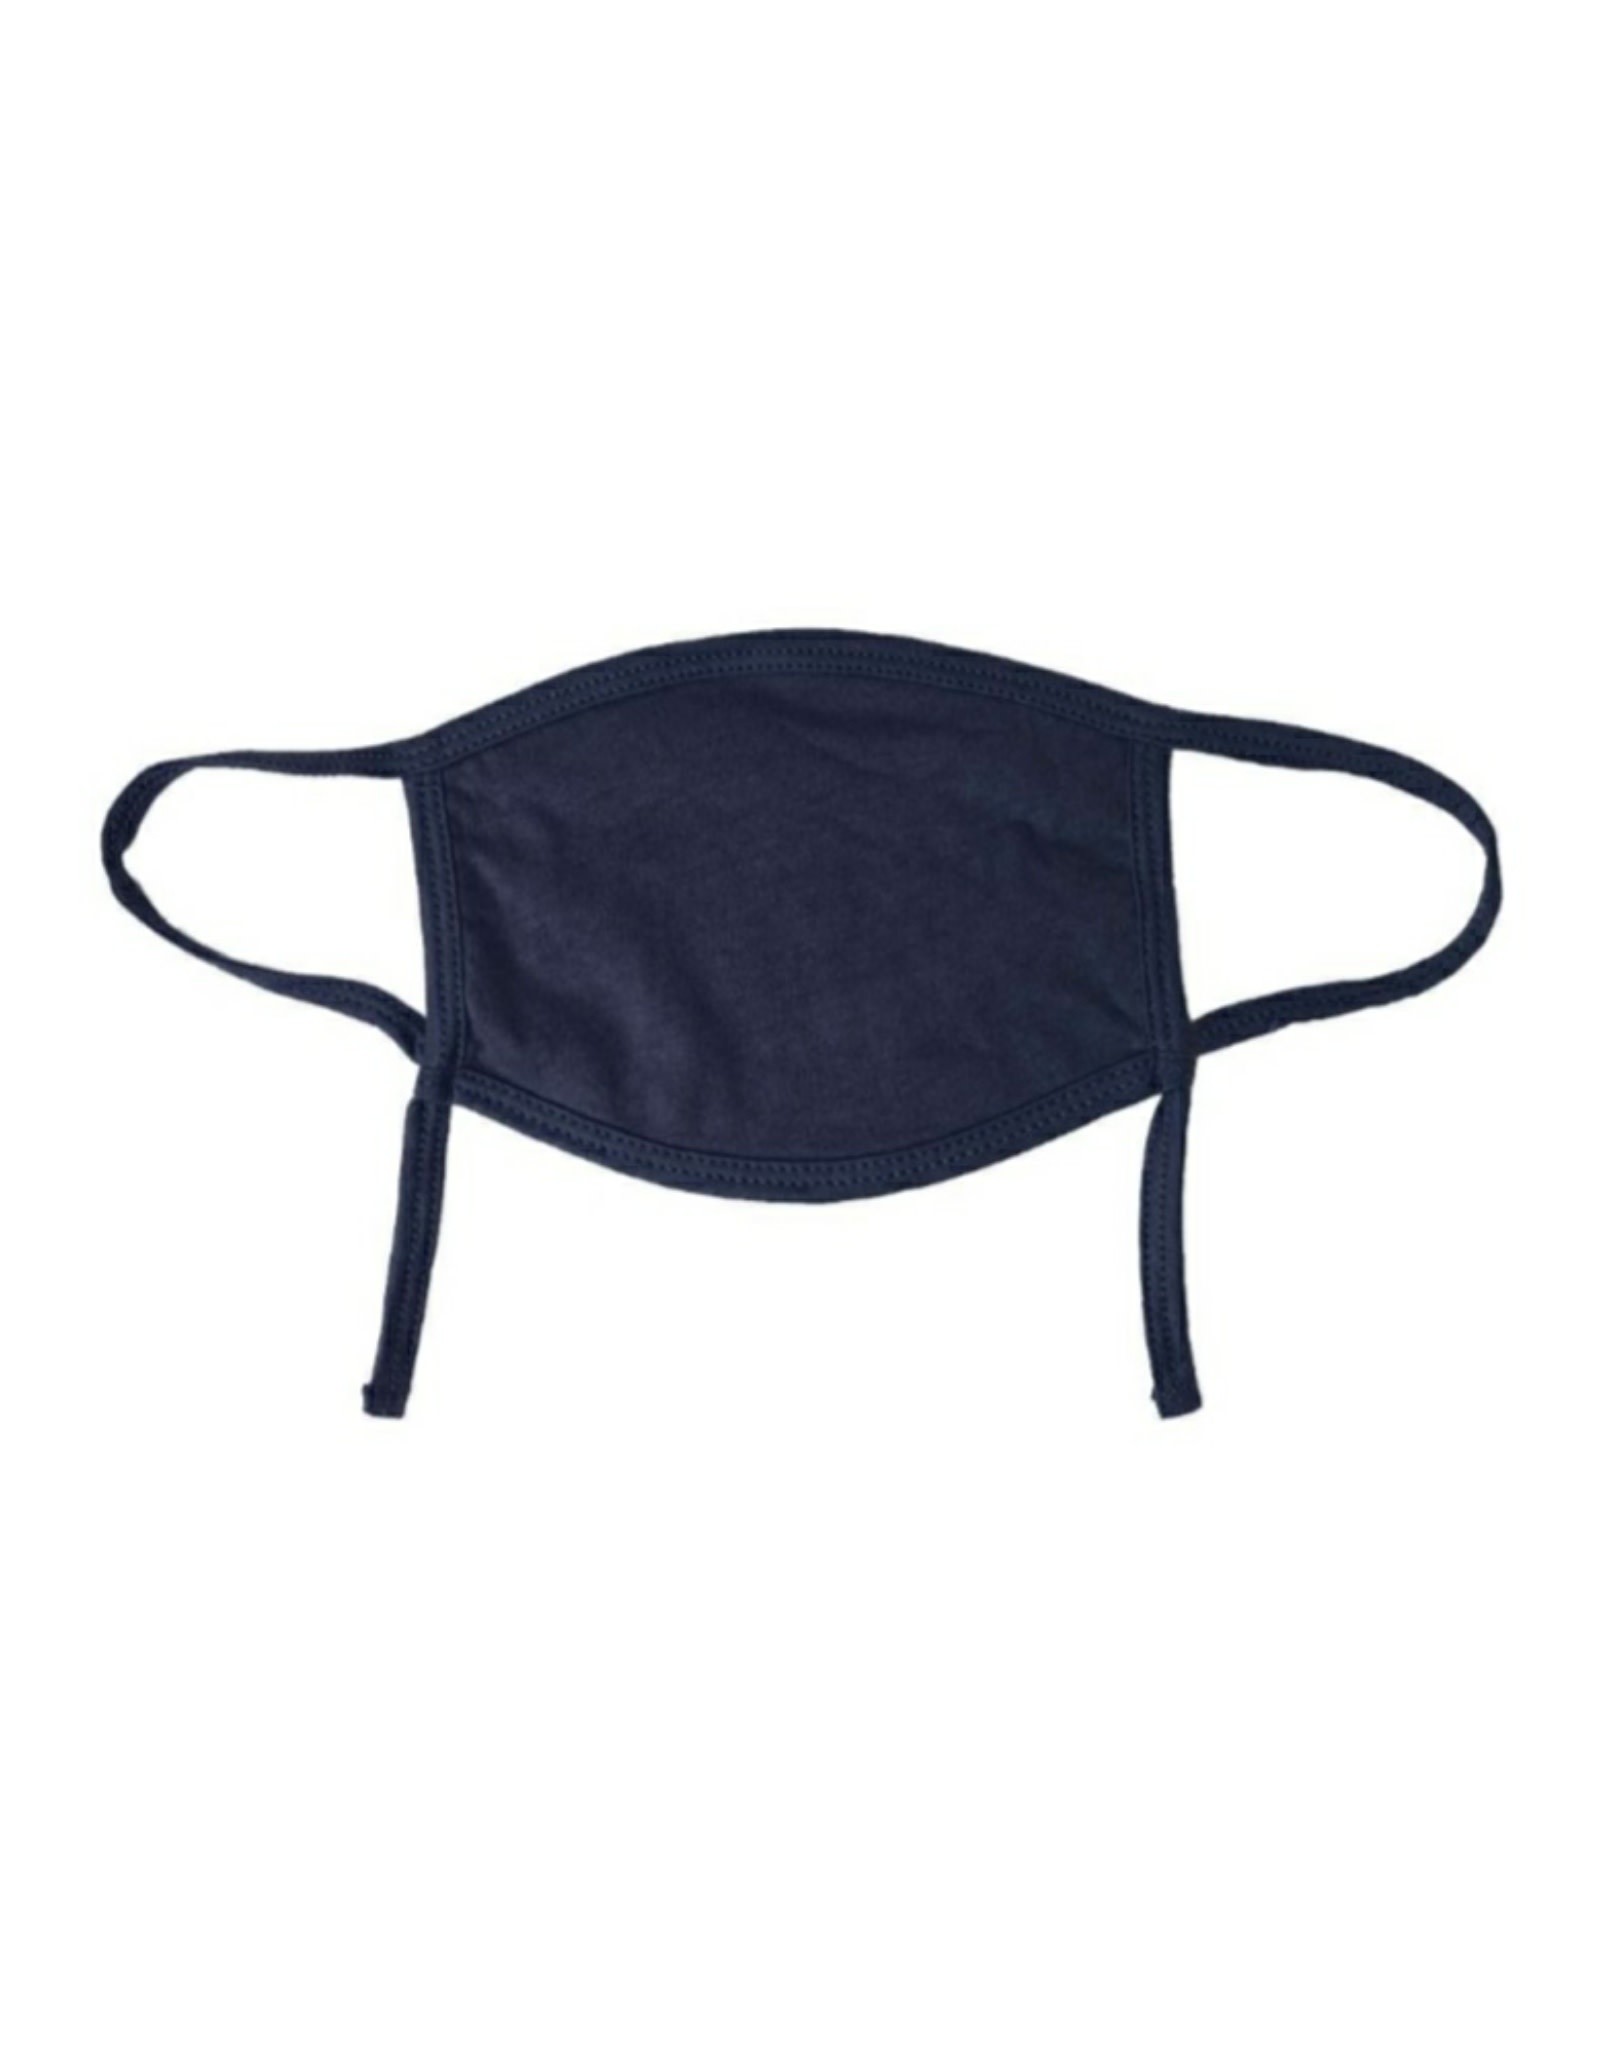 Youth Adjustable Navy Mask